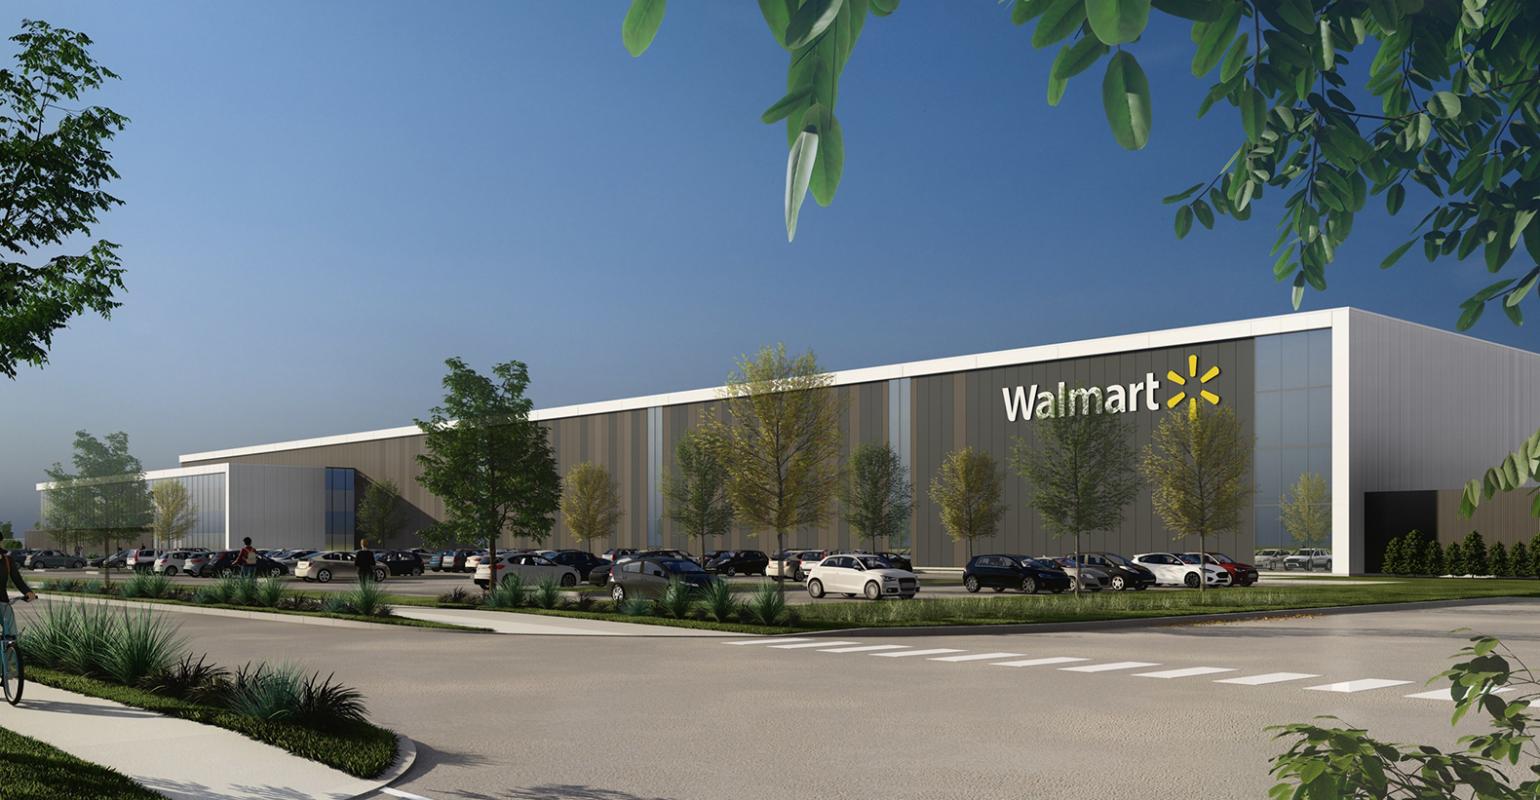 Walmart Canada to build its first-ever fulfillment centre in Quebec